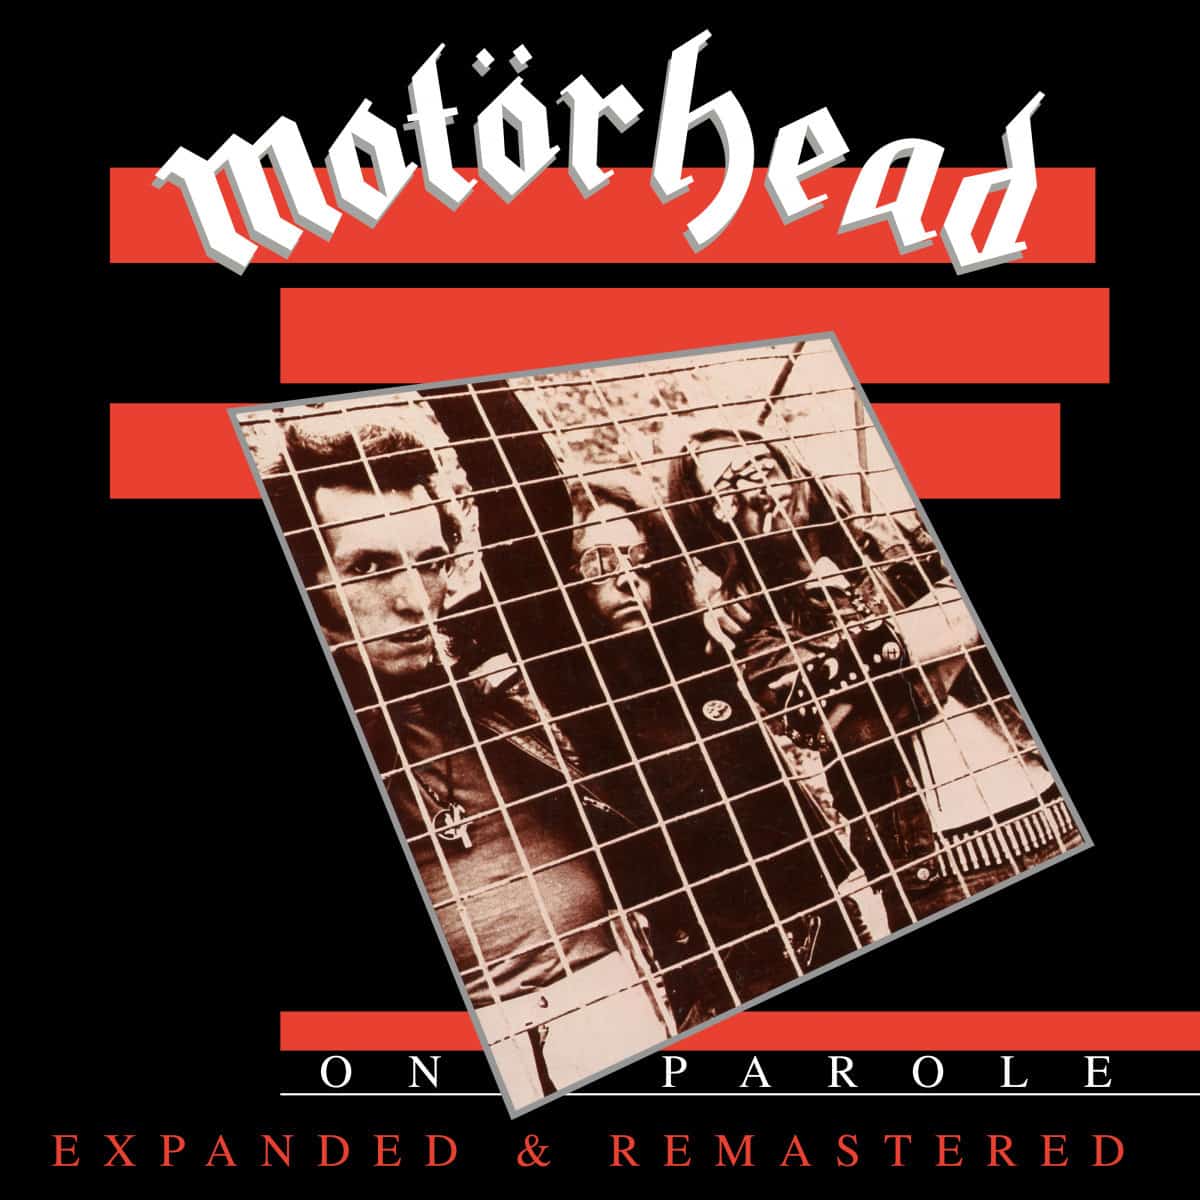 MOTORHEAD - On Parole: Expanded and Remastered - 2LP - Vinyl